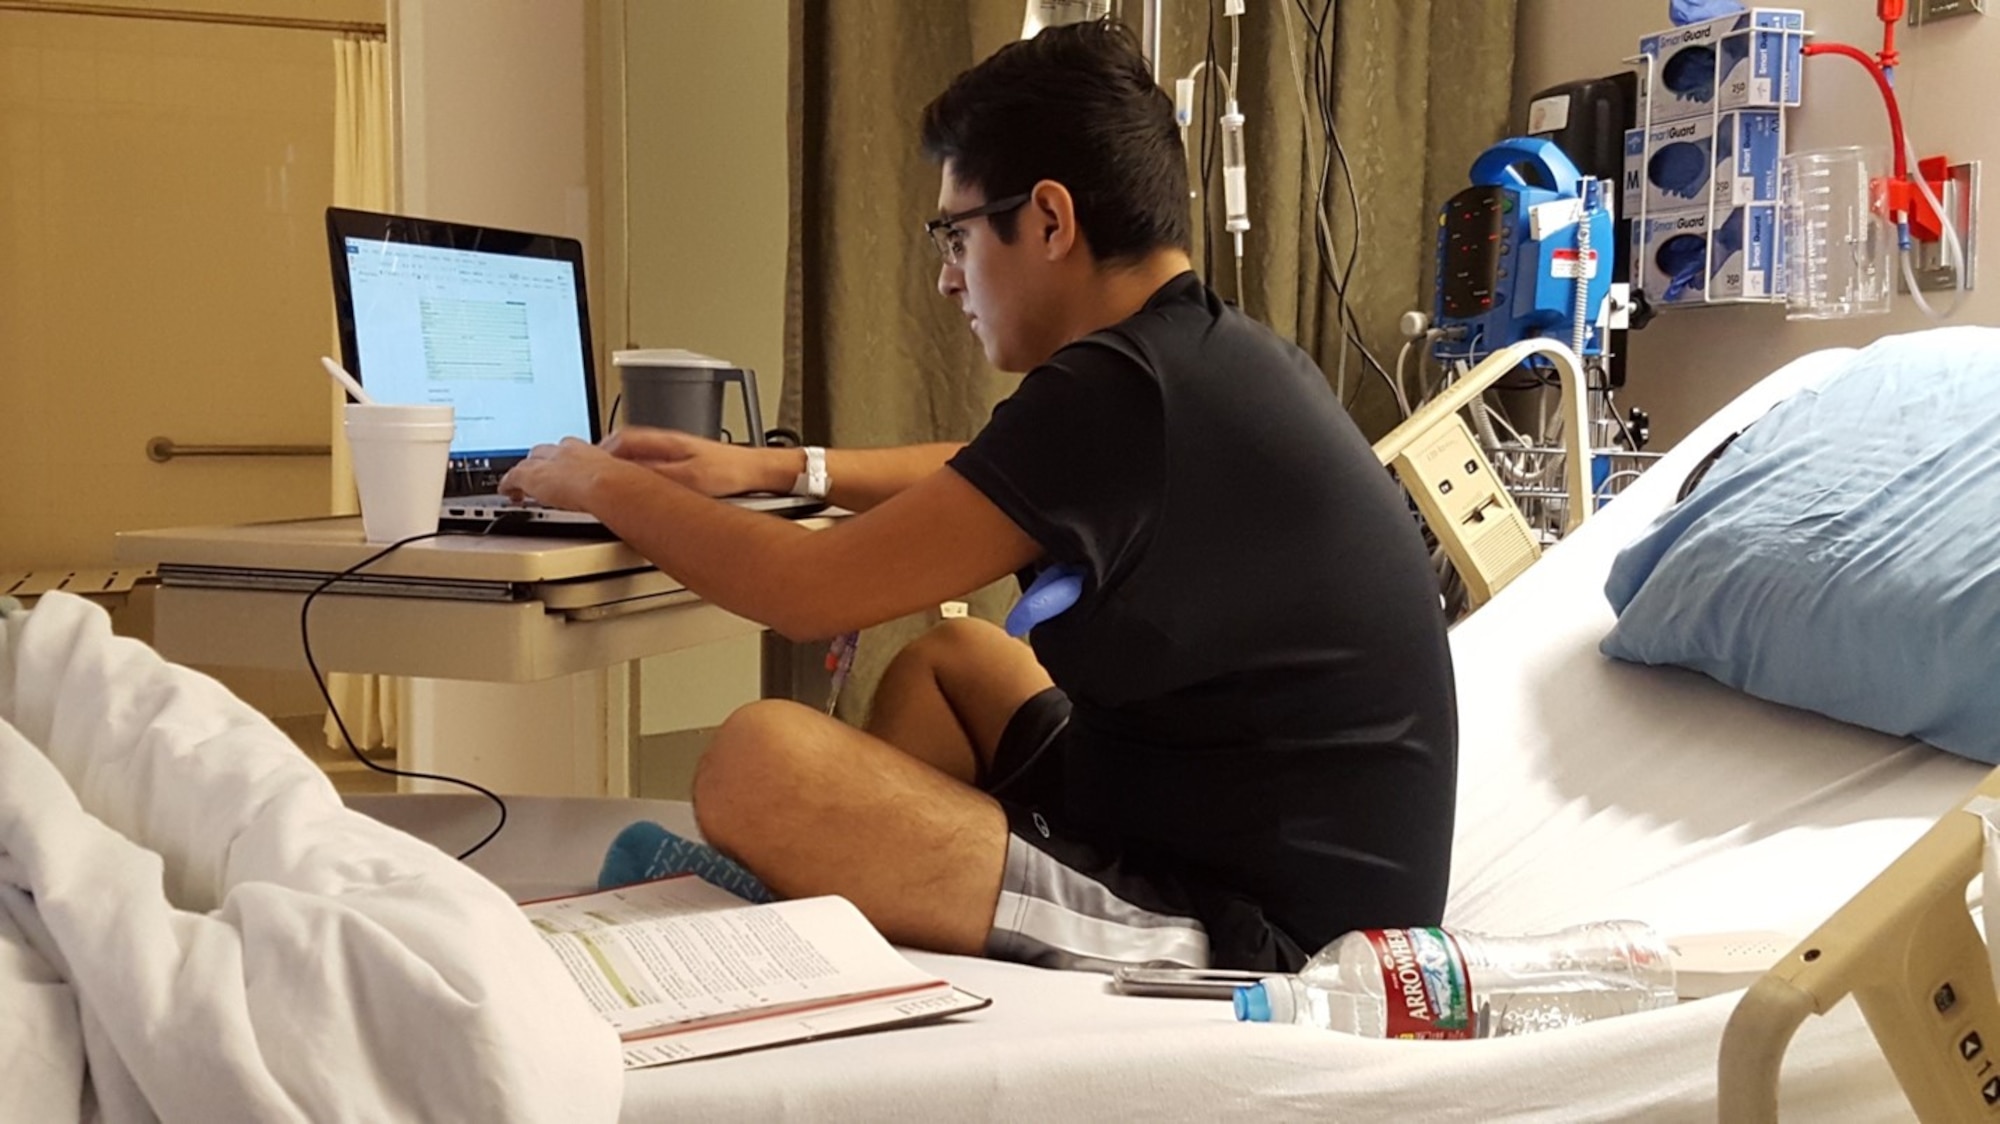 Michael Chacon works on completing his college requirements while receiving cancer treatment in the hospital in 2016. Chacon is currently an Officer Trainee attending Officer Training School before returning to his Air National Guard unit an completing training requirements to be an intelligence officer